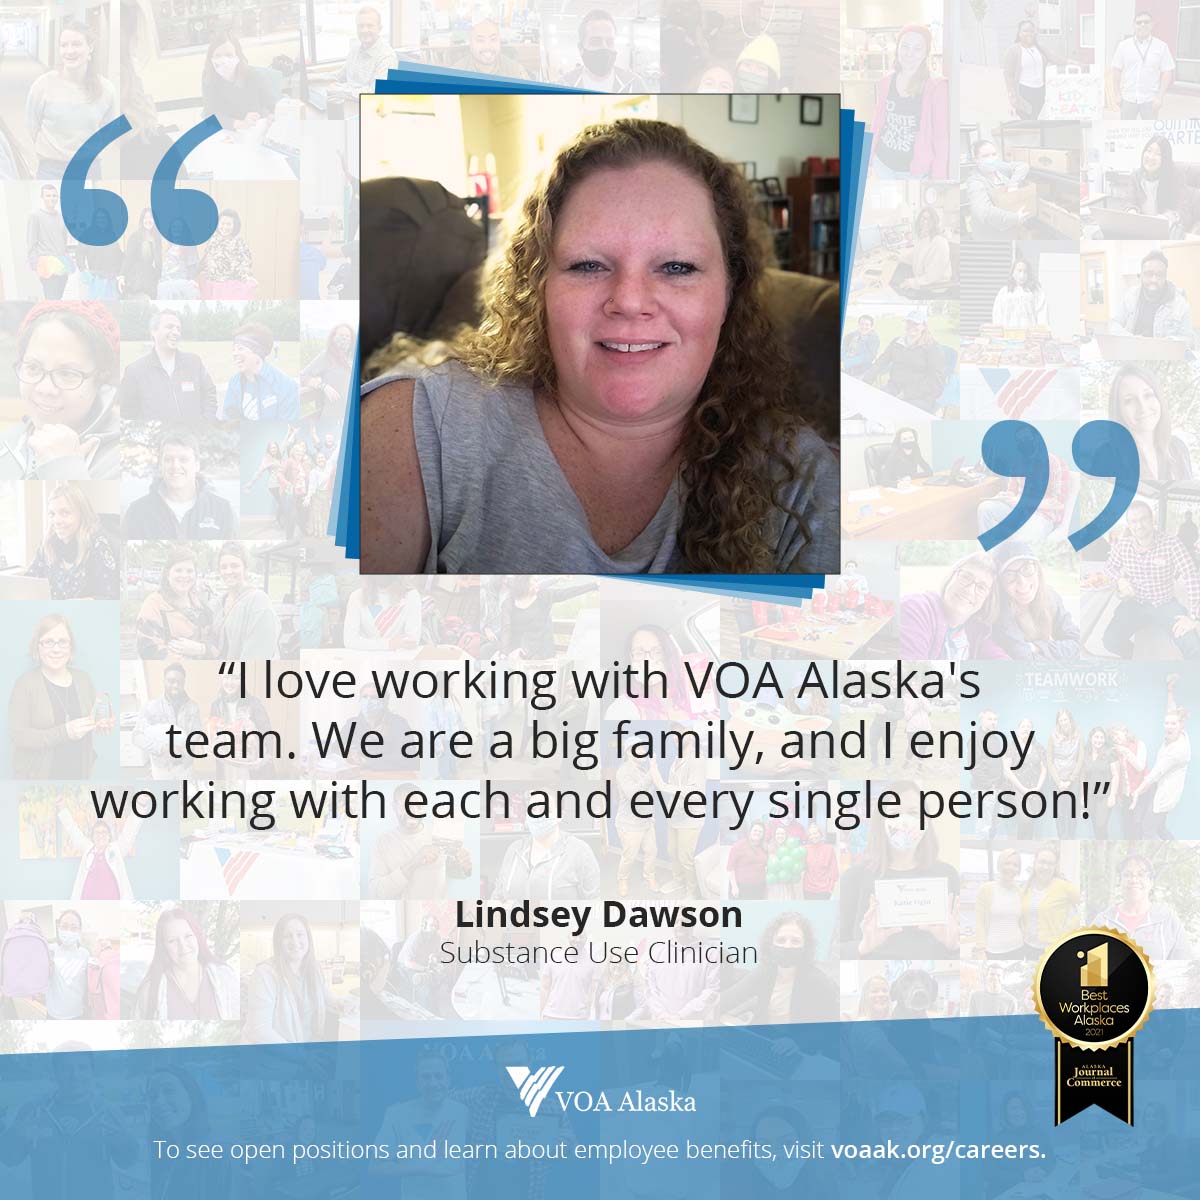 Graphic with employee testimonial from Lindsey Dawson, Substance Use Clinician: “I love working with VOA Alaska's team. We are a big family, and I enjoy working with each and every single person!”